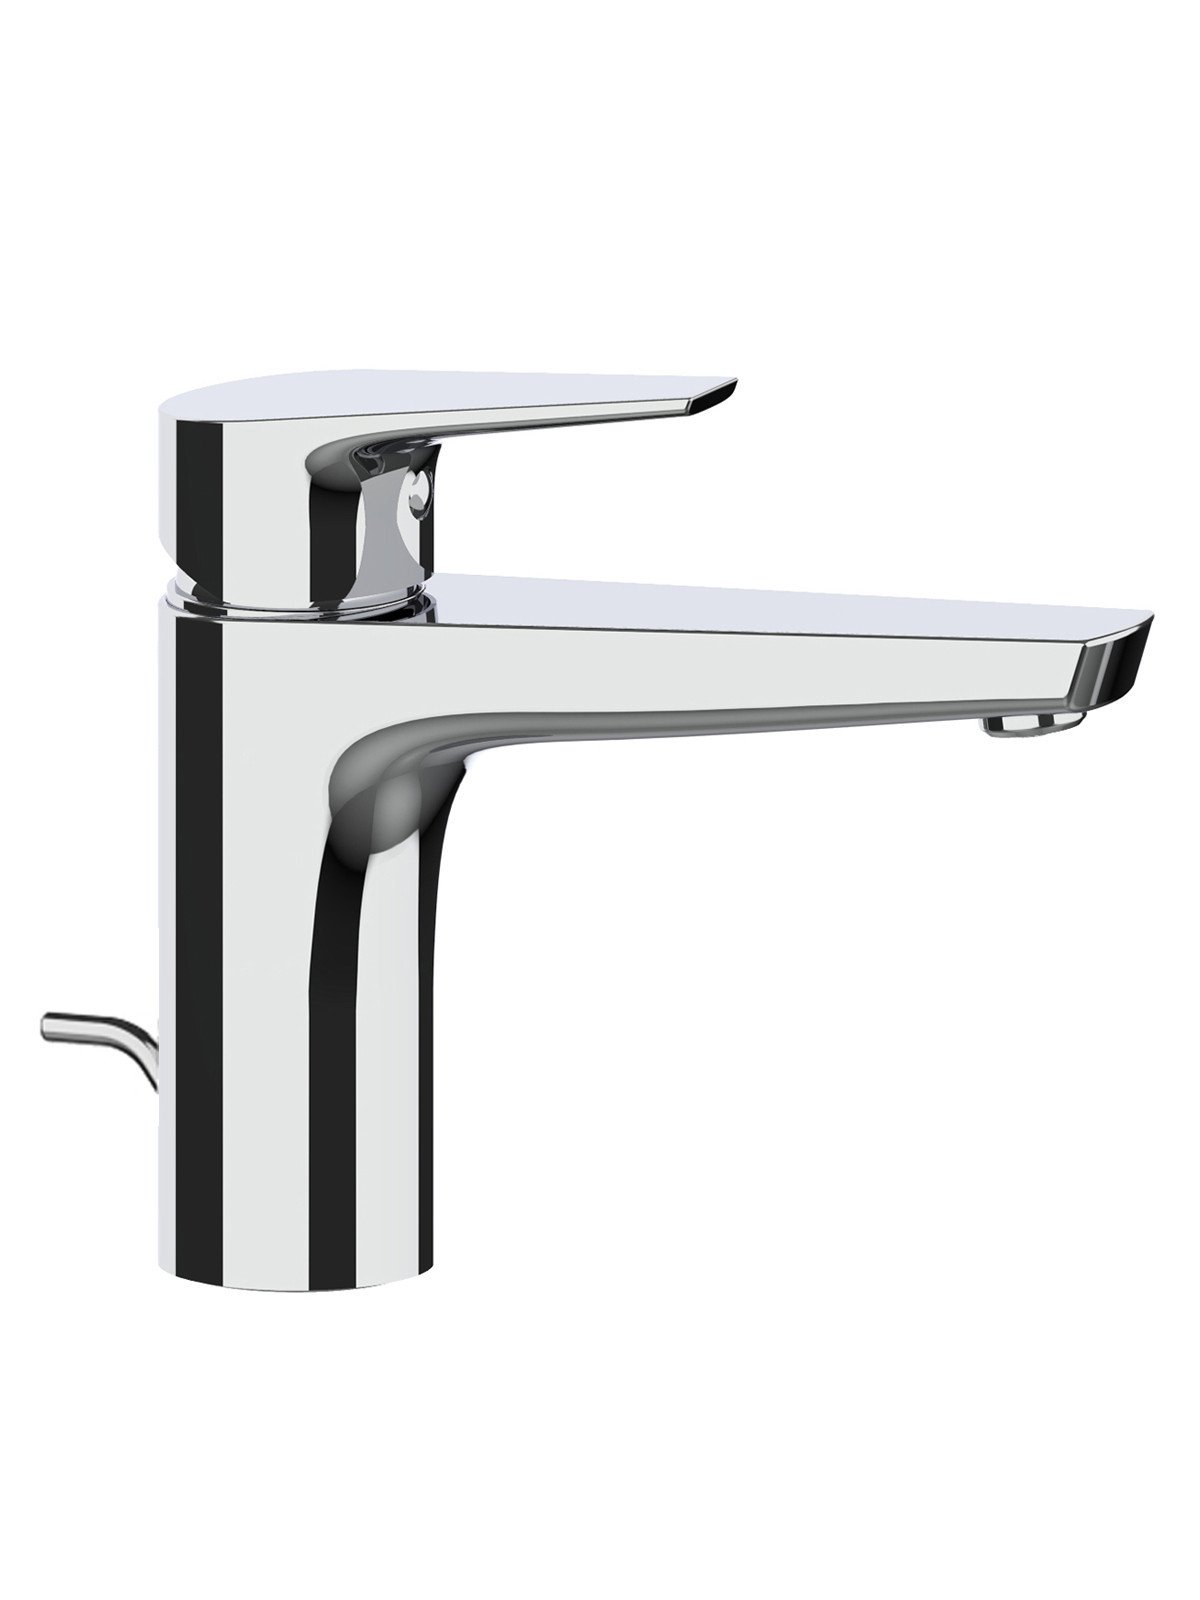 ”Large” version single-lever washbasin mixer with pop-up waste